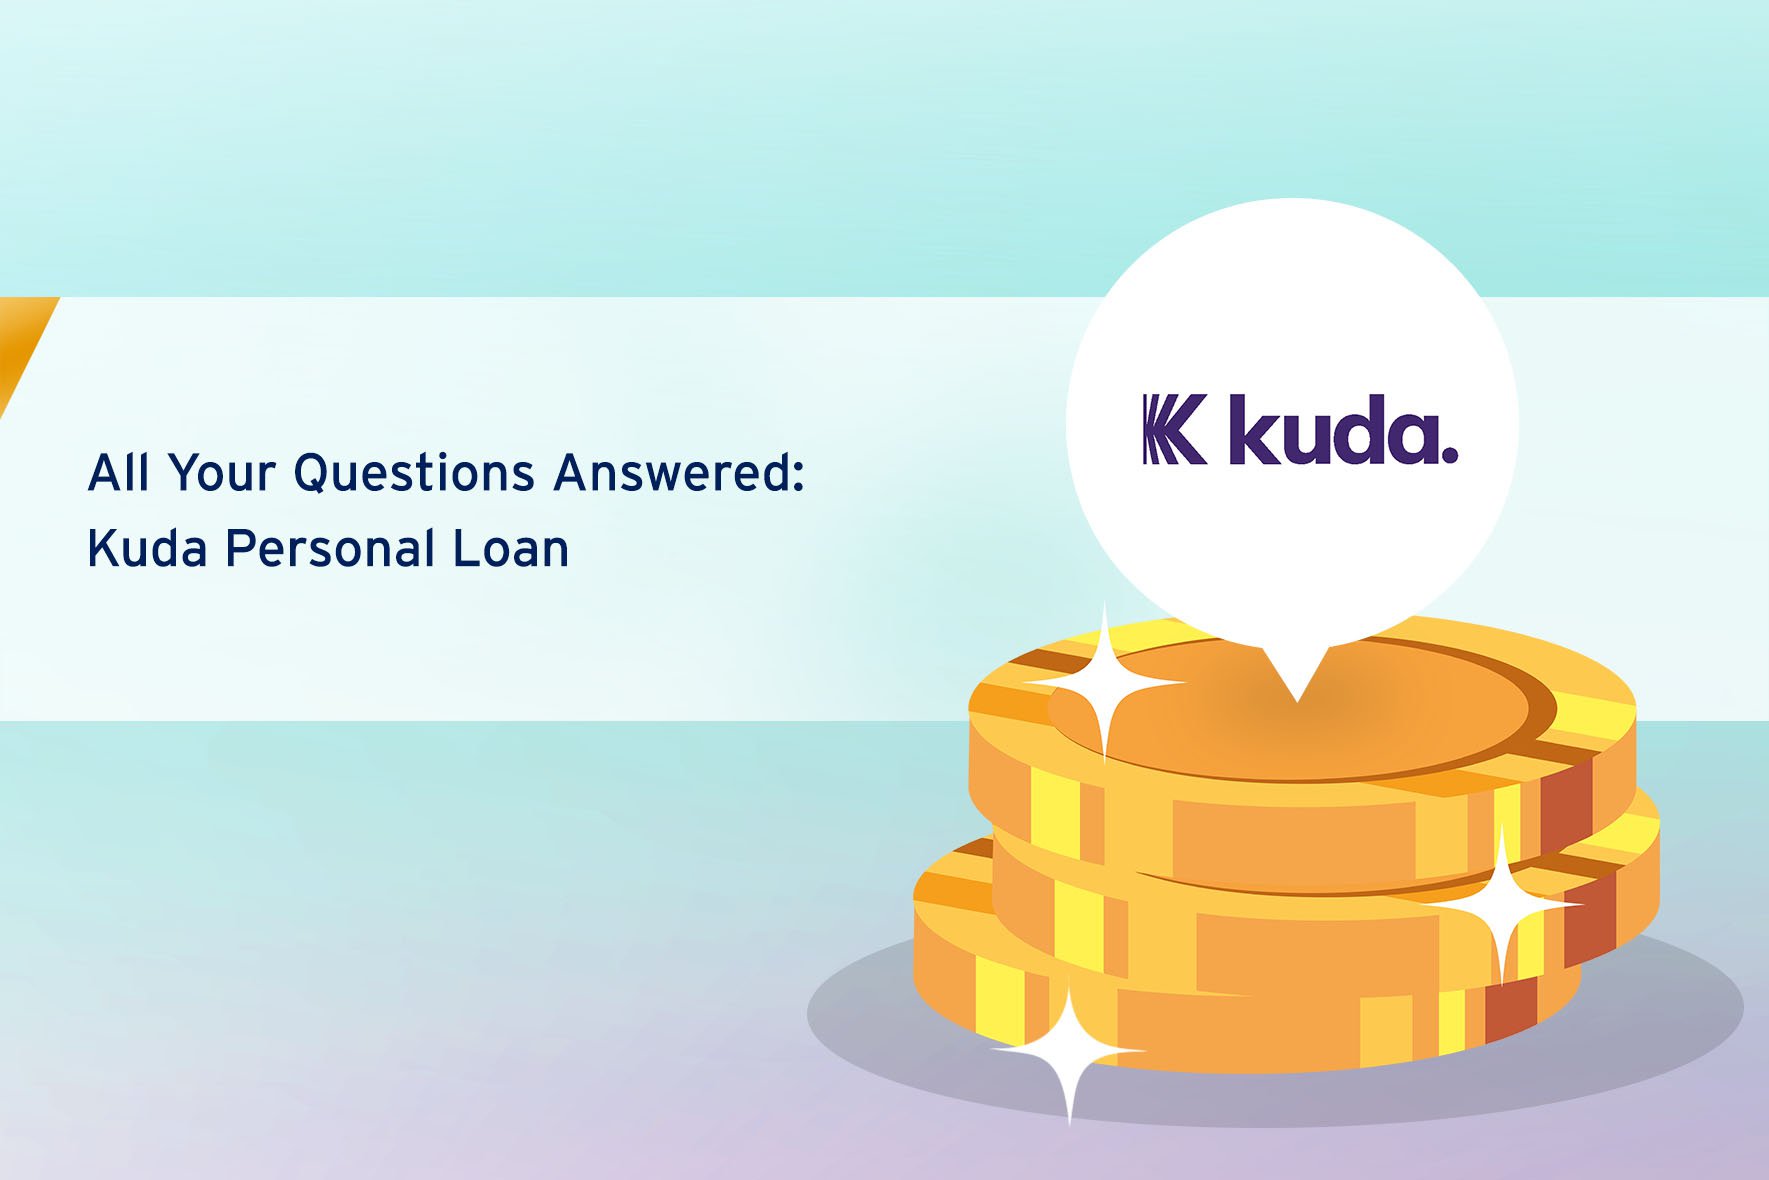 All Your Questions Answered - Kuda Personal Loans cover